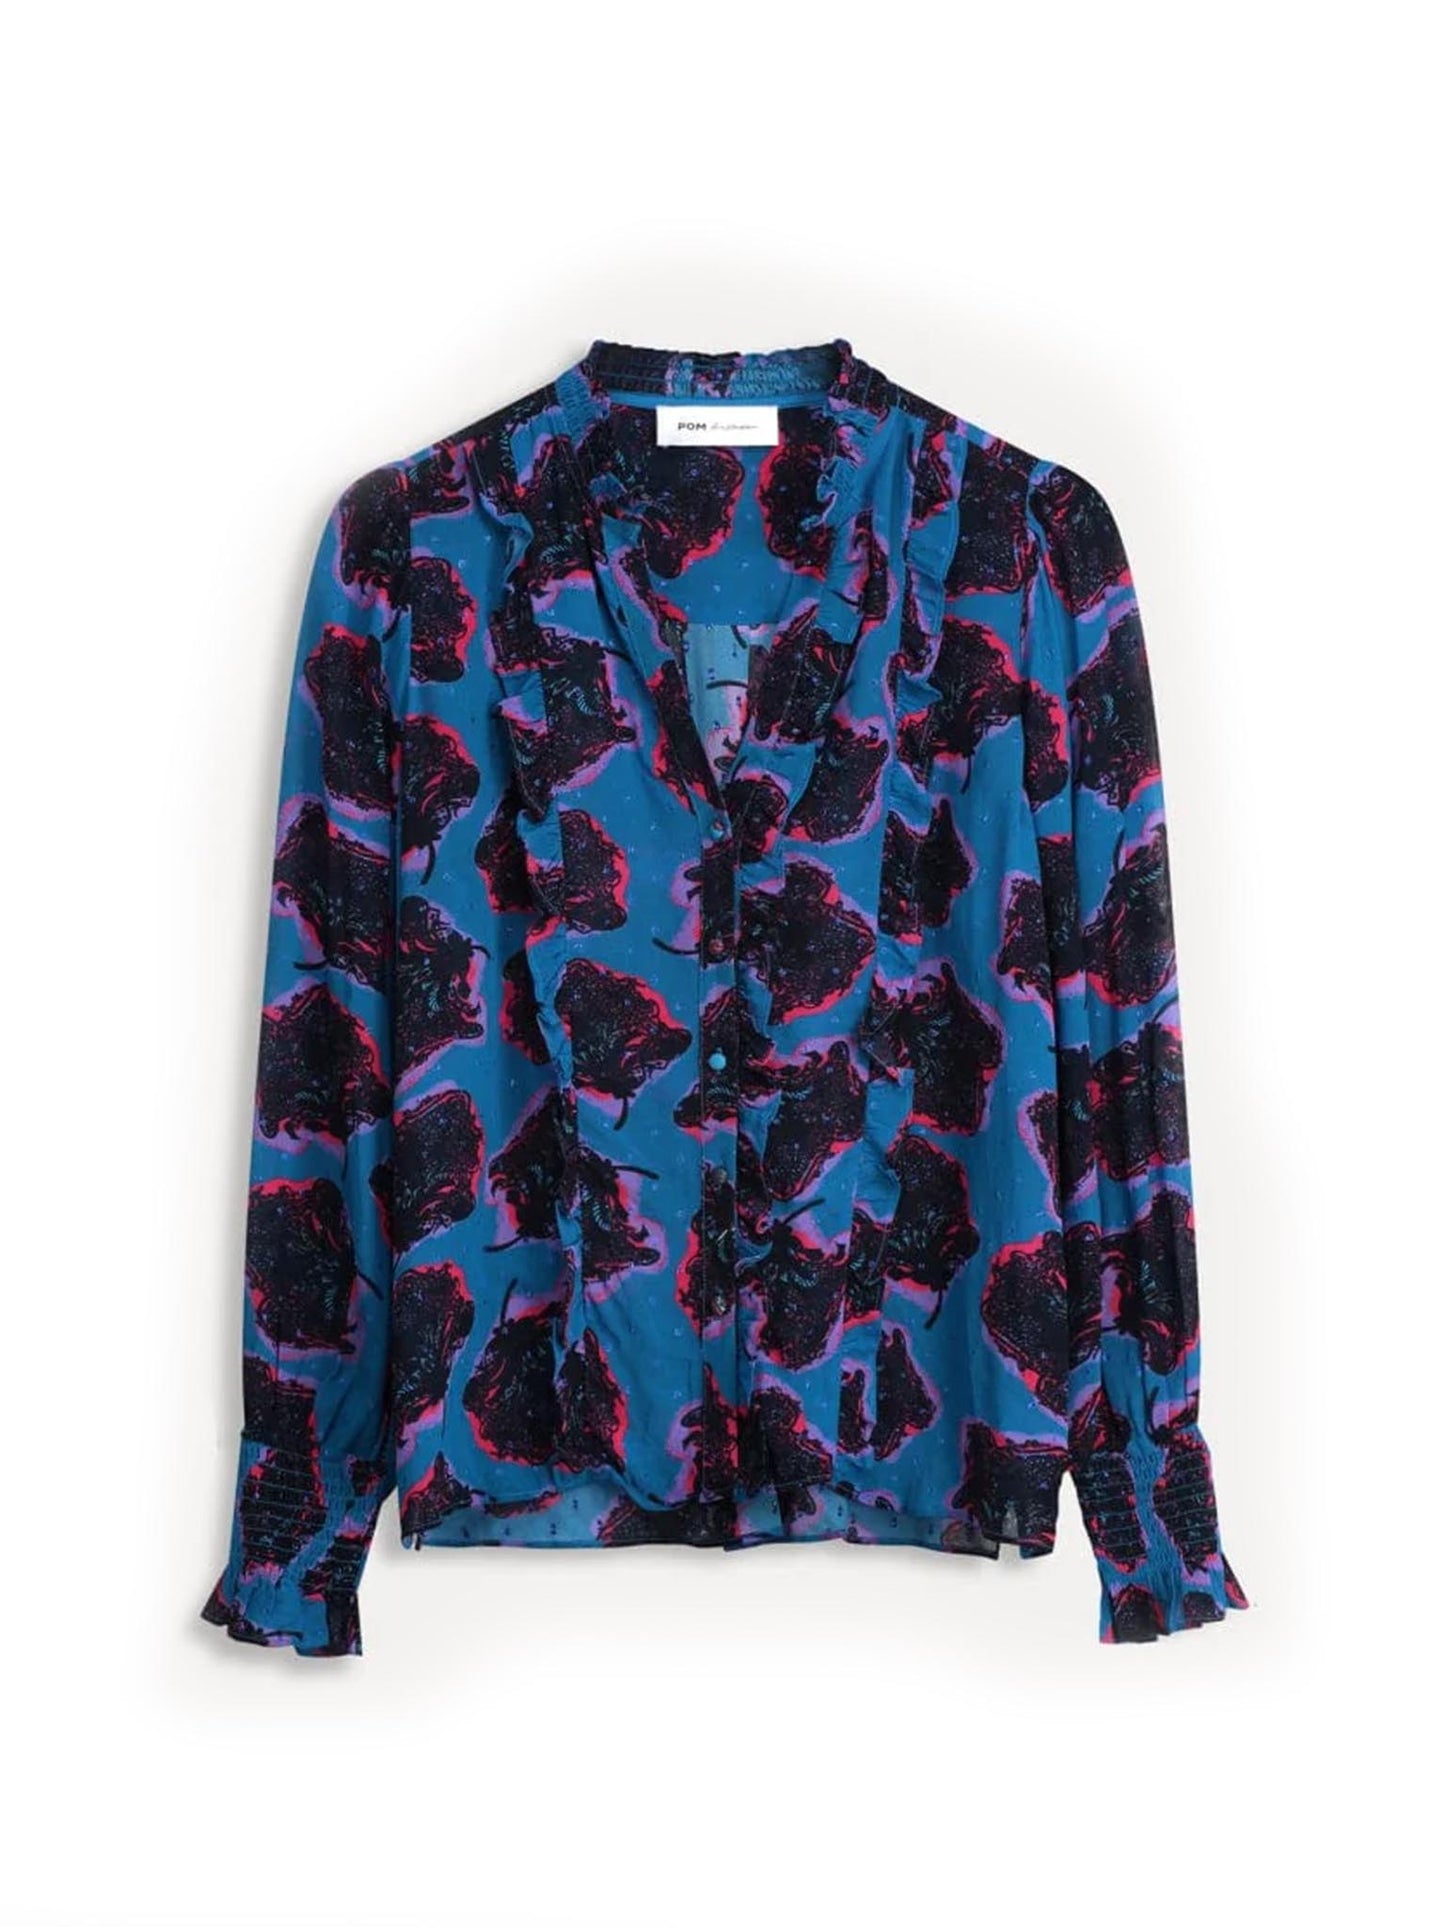 POM Amsterdam Flower Pop Blue Shirt Cutout from the front